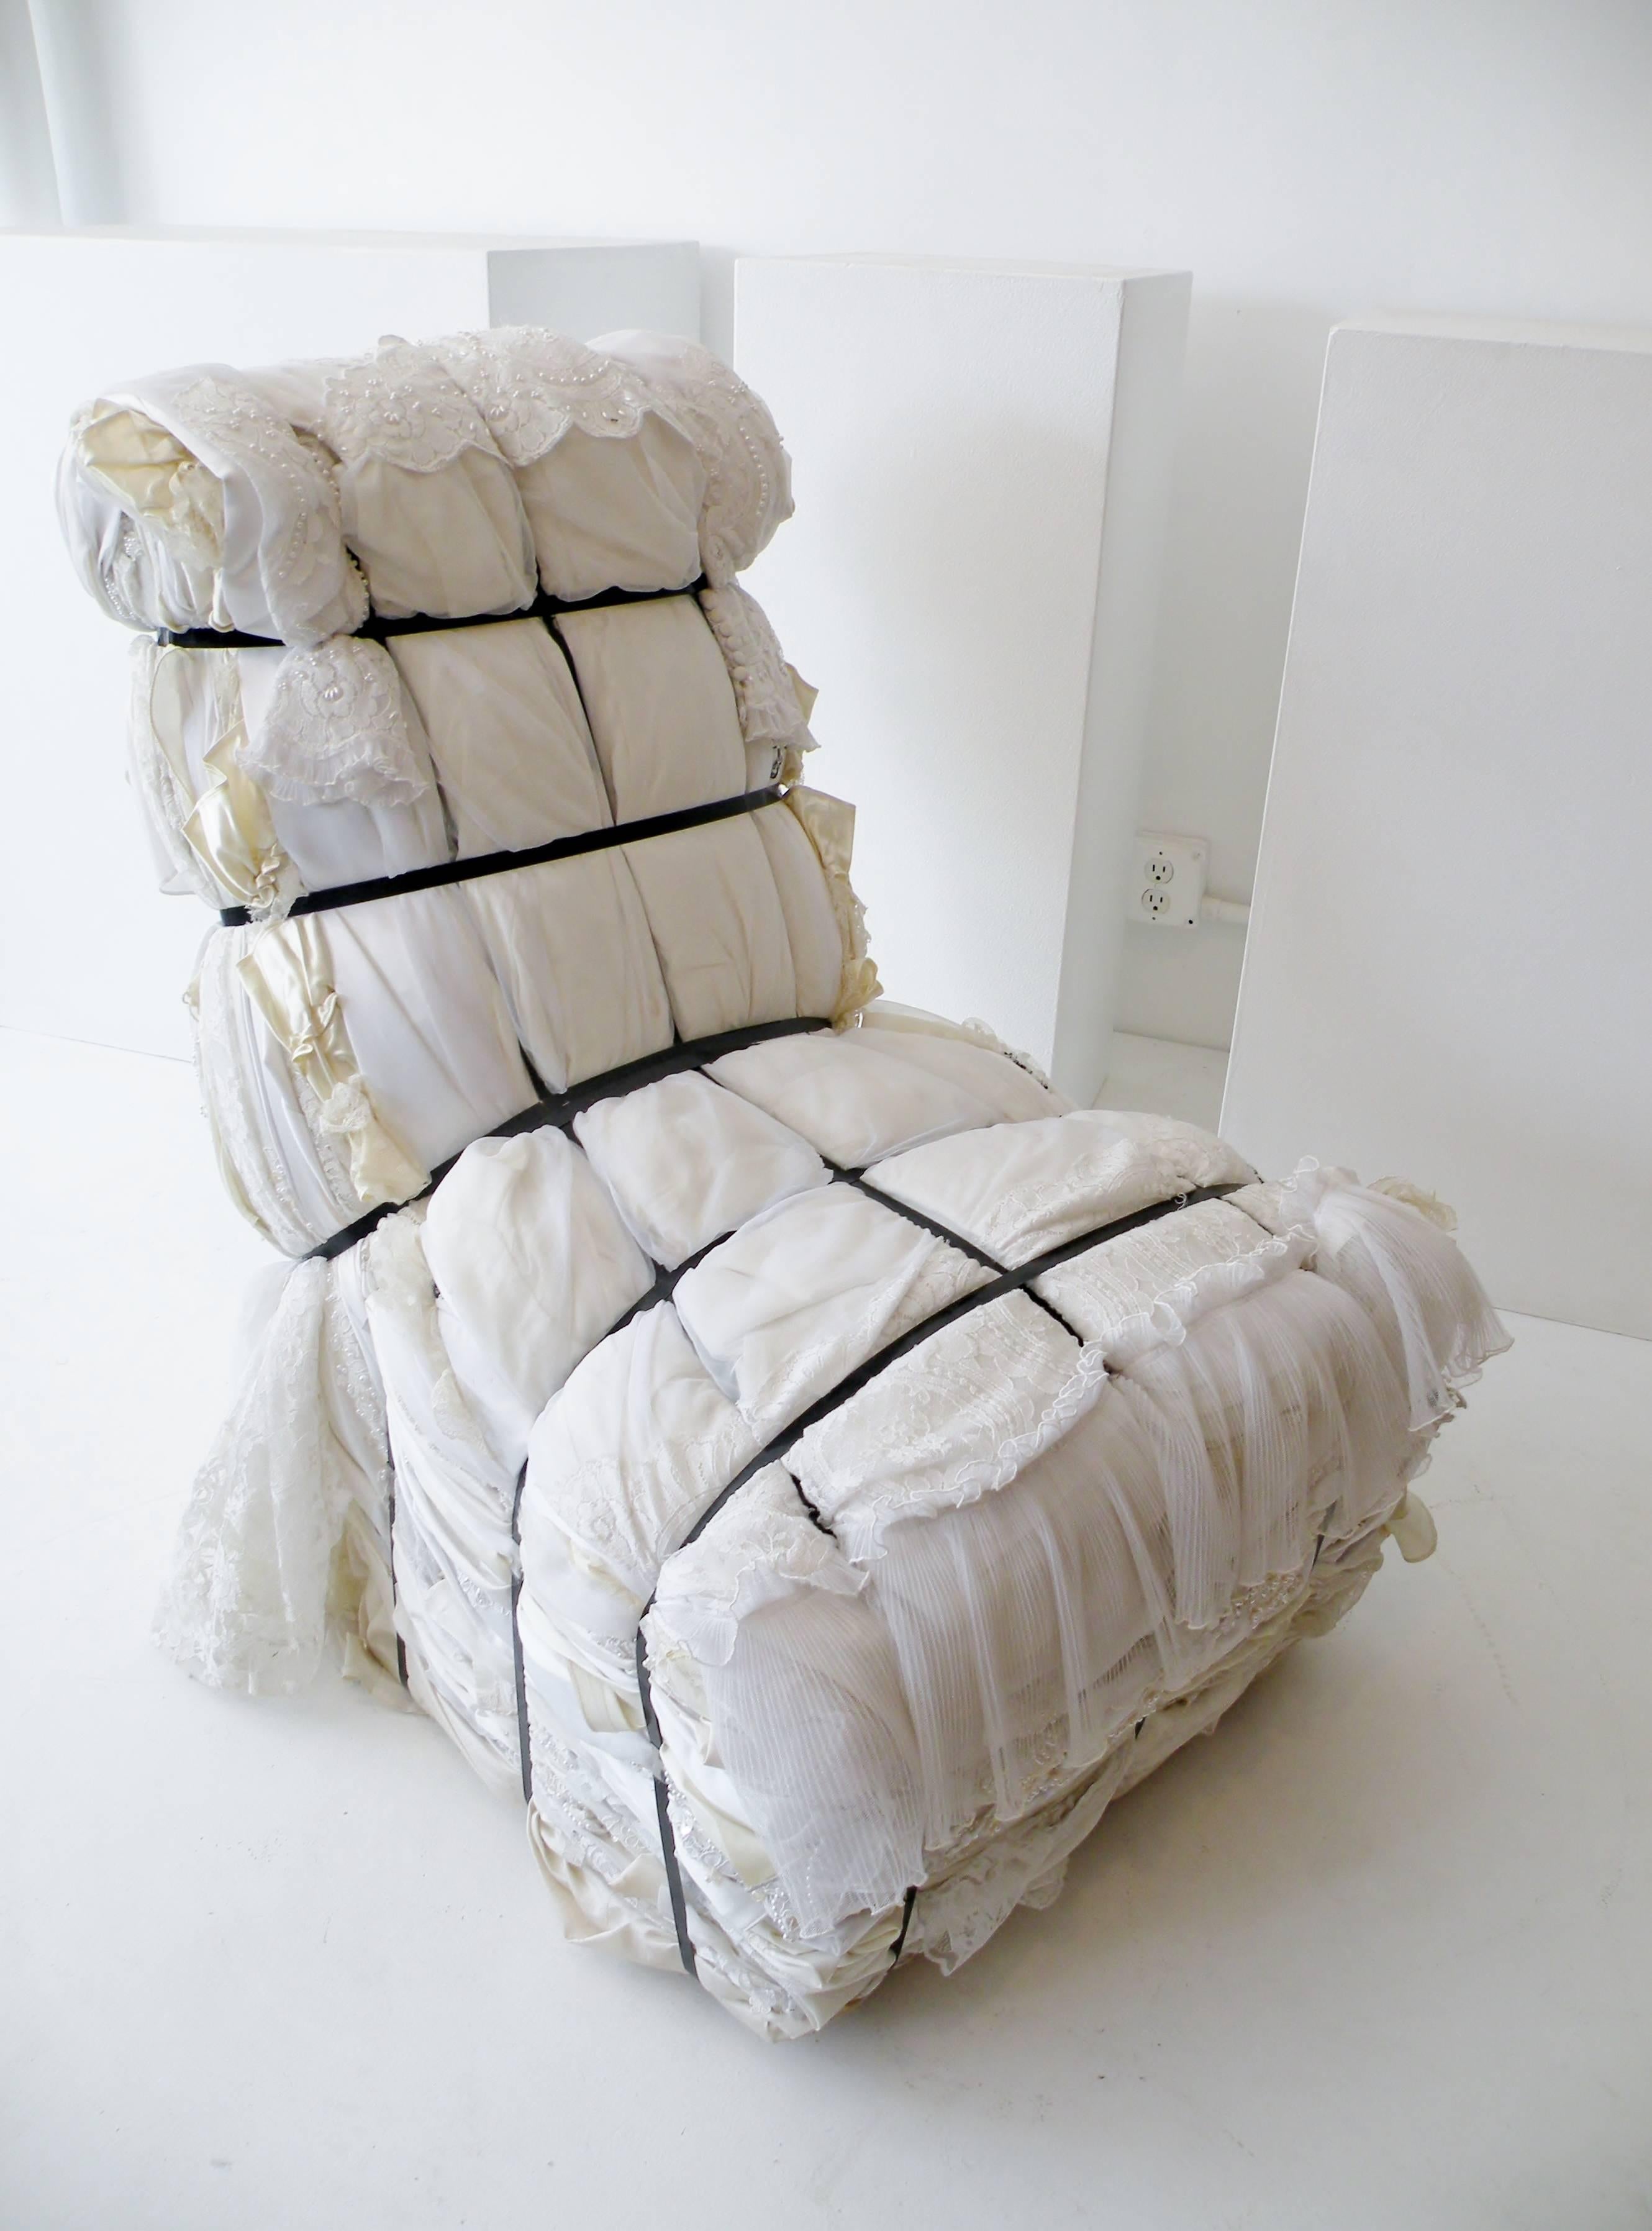 Important Tejo Remy Wedding Dress Rag Chair for Droog Design For Sale ...